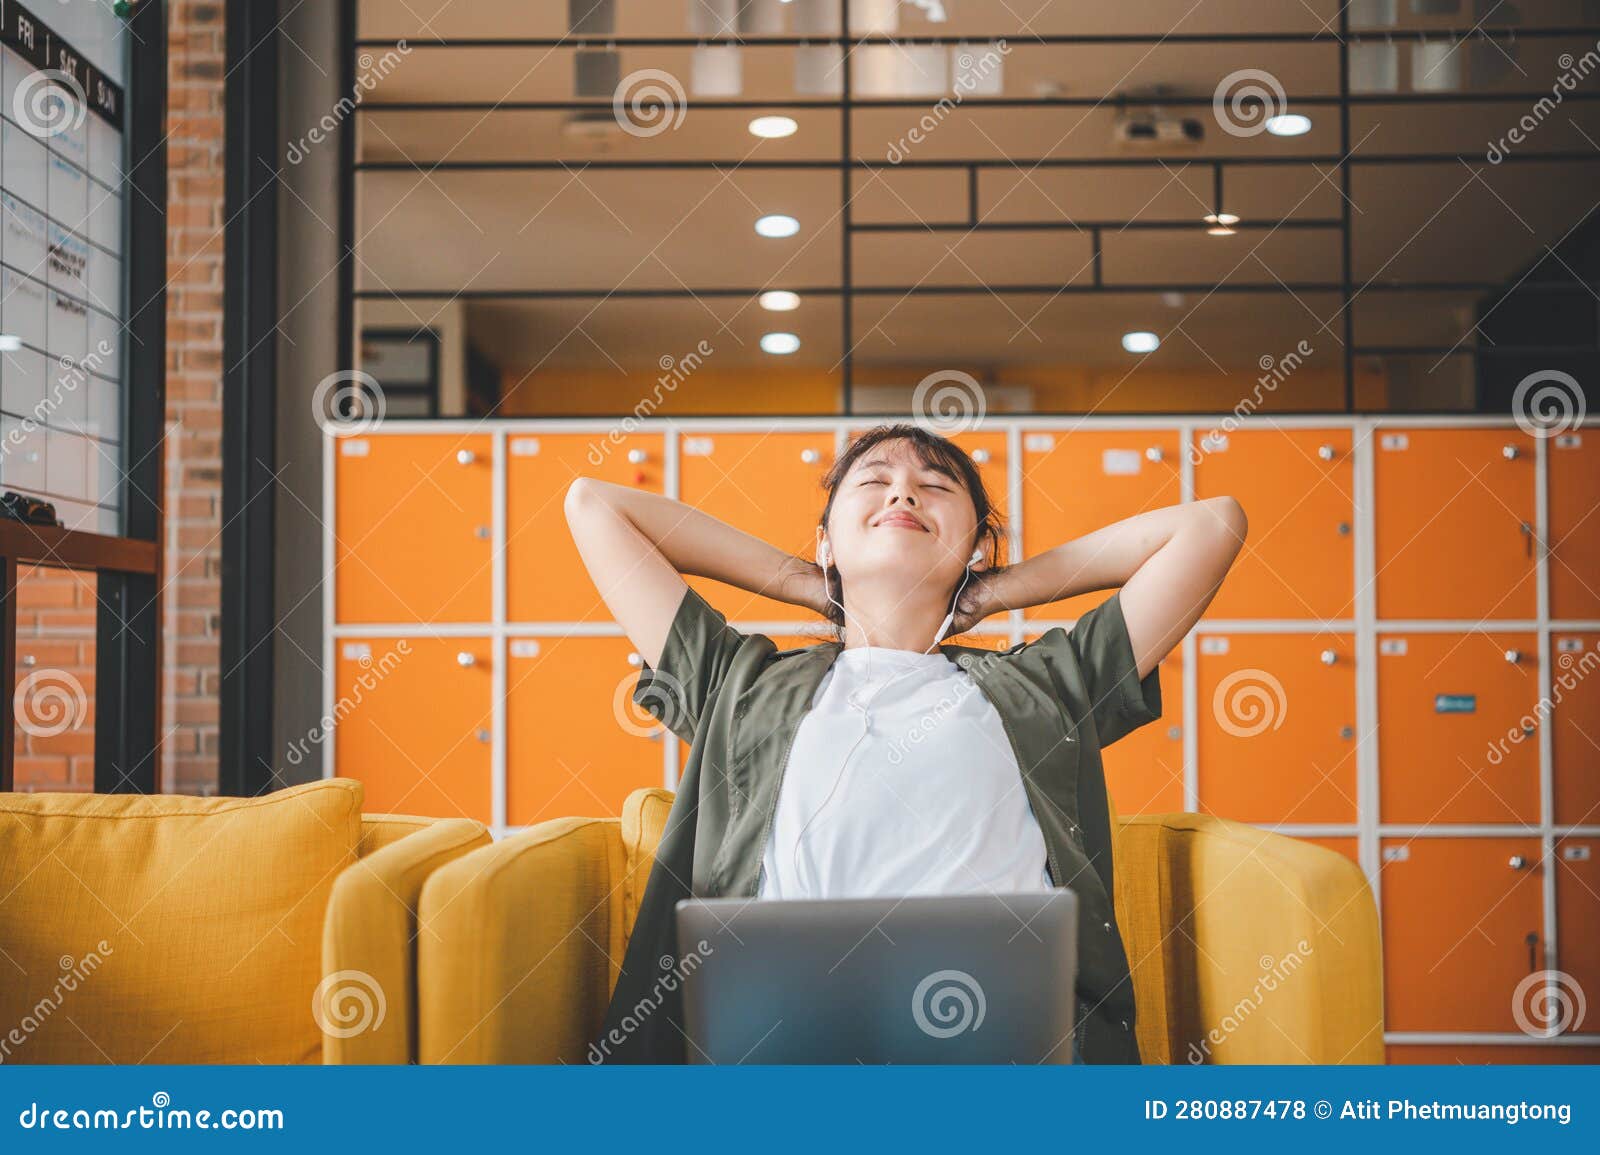 young asian freelancers are stretching oneself and relaxing after working and planning to work while working on laptop in the cafe